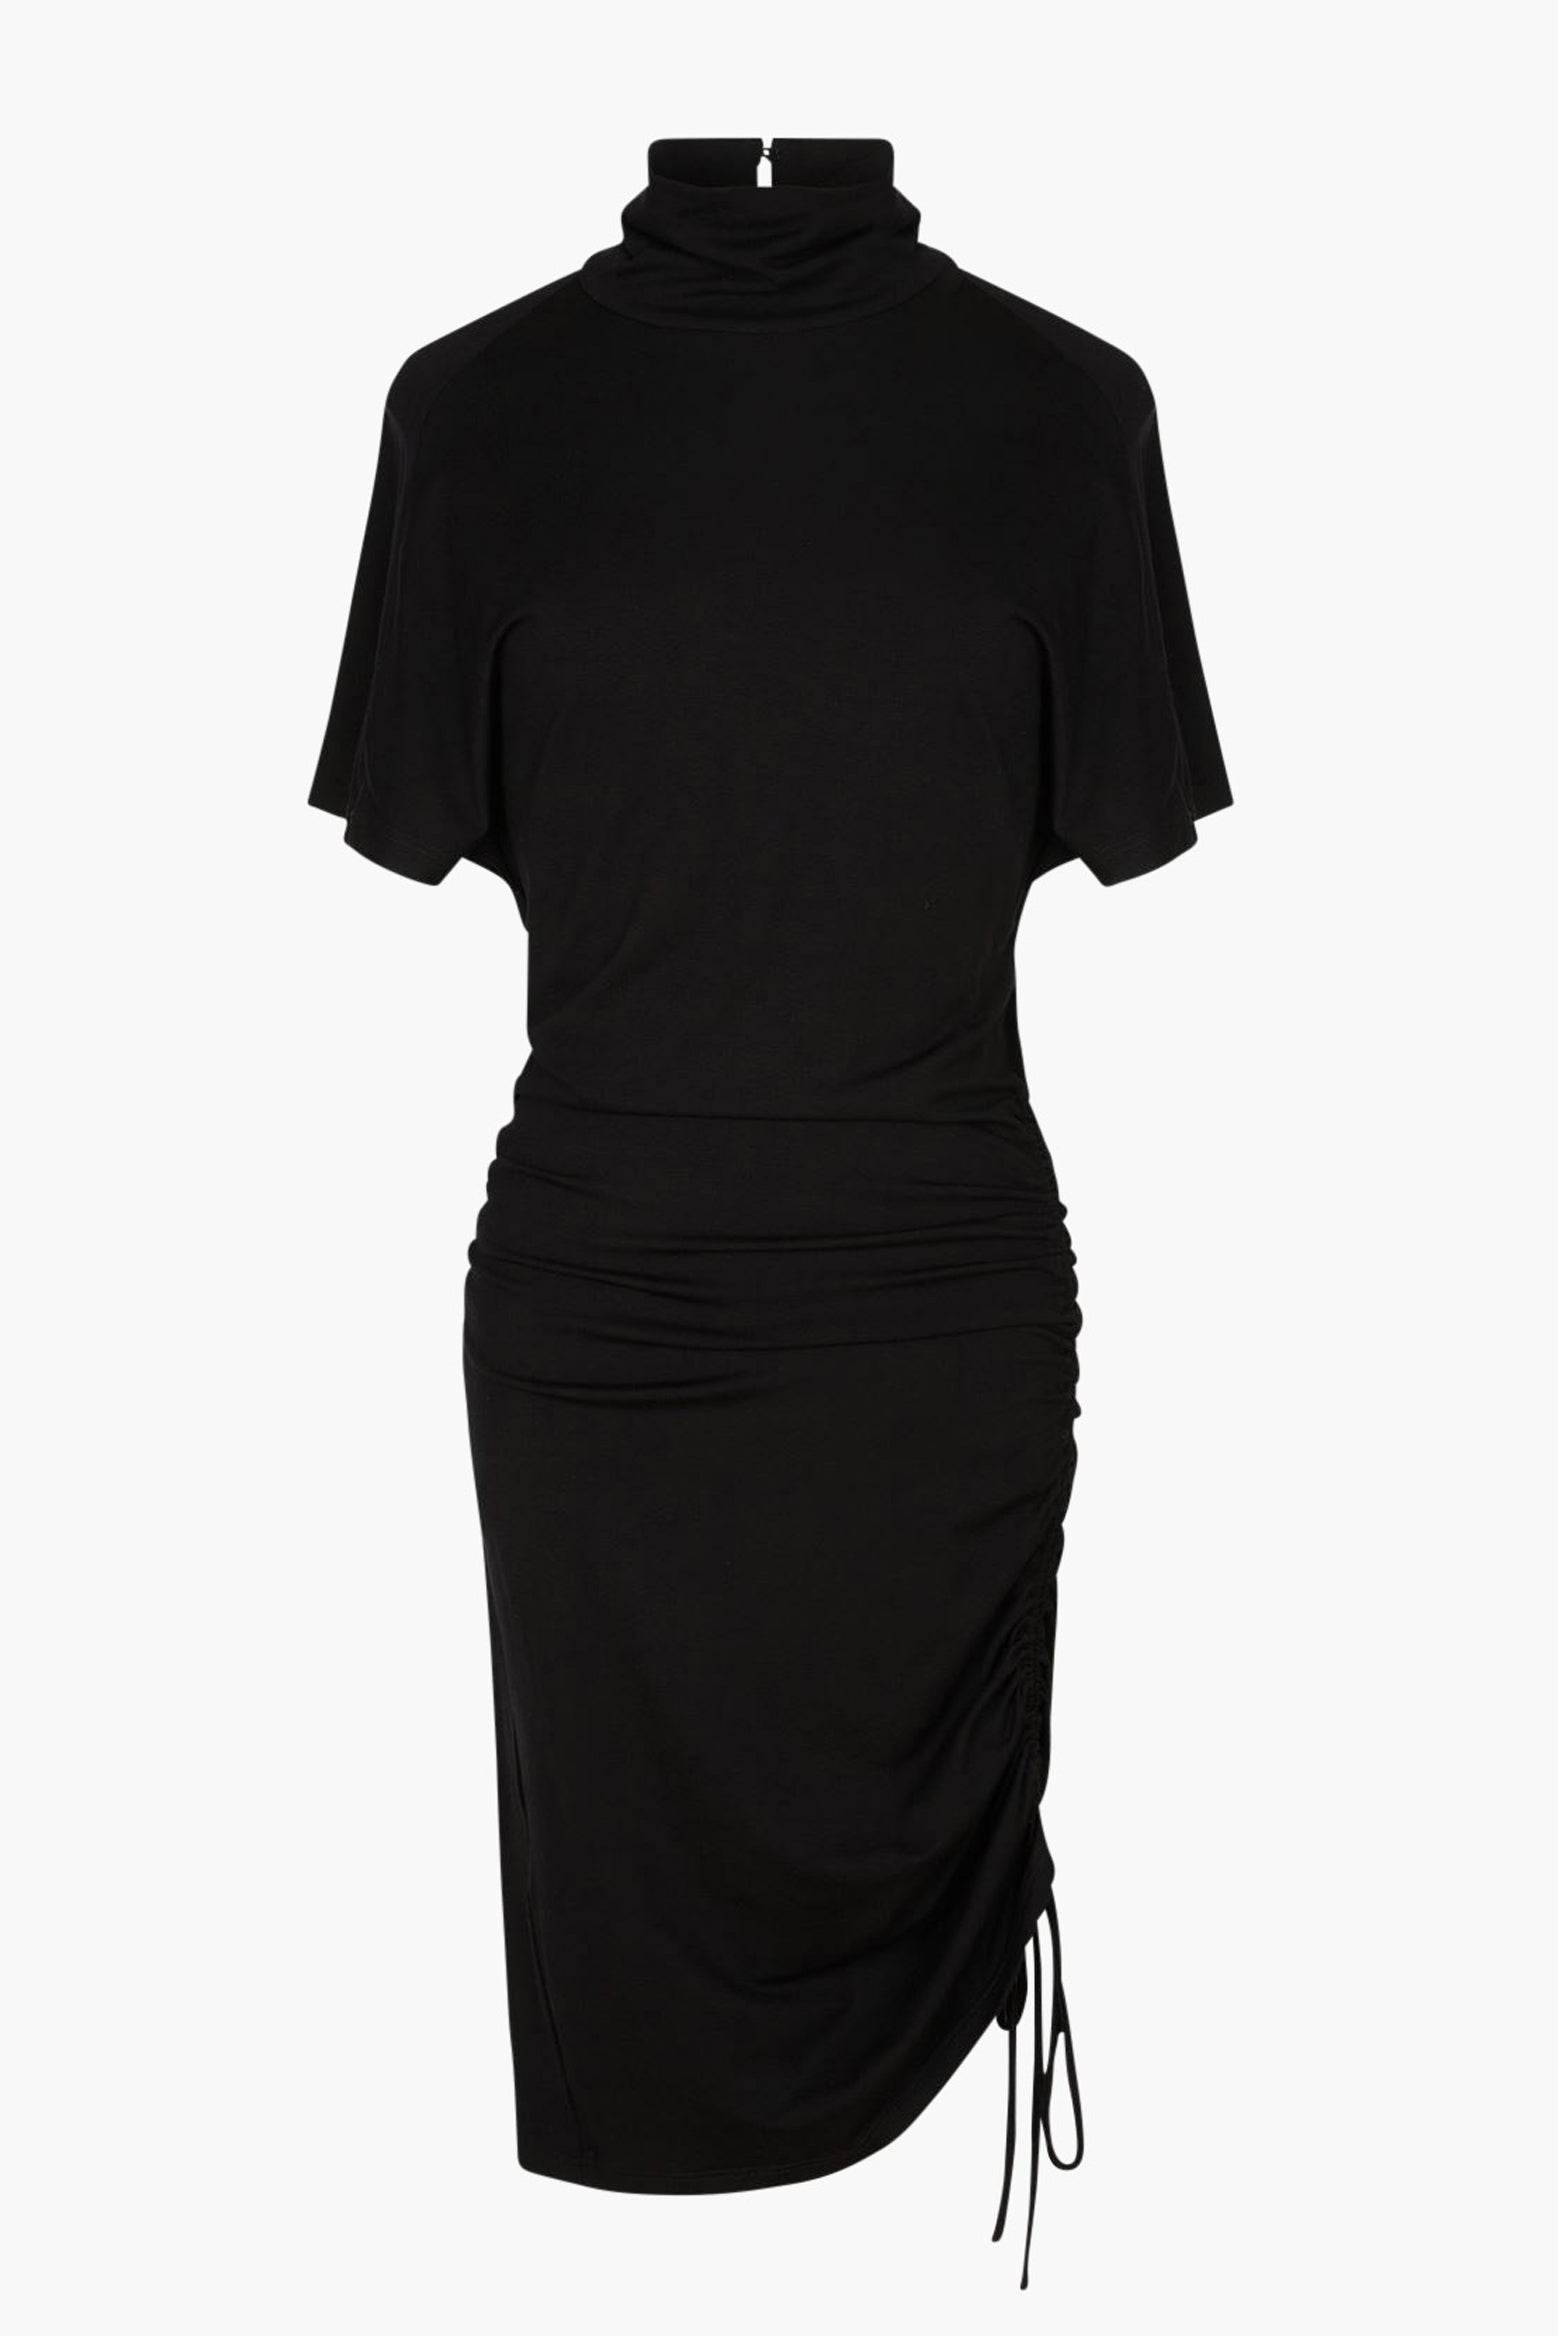 The Isabel Marant Lya Dress in Black available at The New Trend Australia